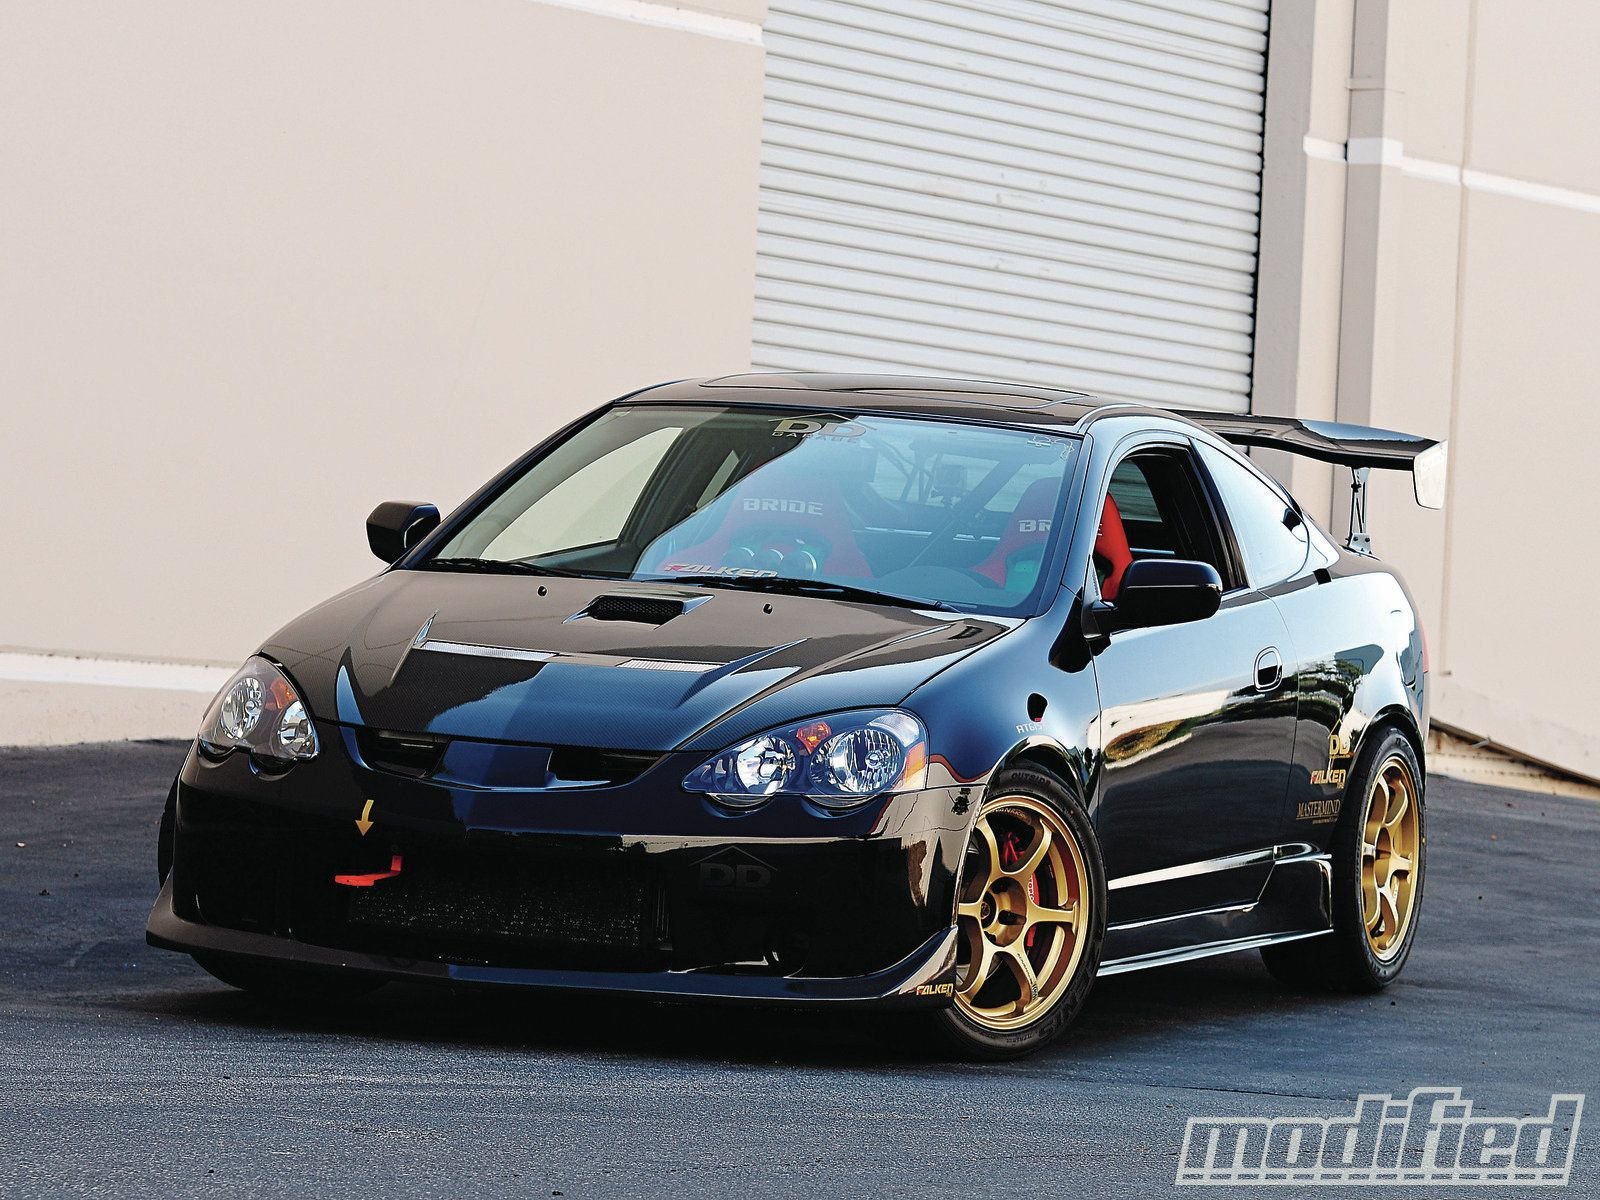 Acura Rsx Honda Coupe Tuning Cars Japan Wallpaper Background